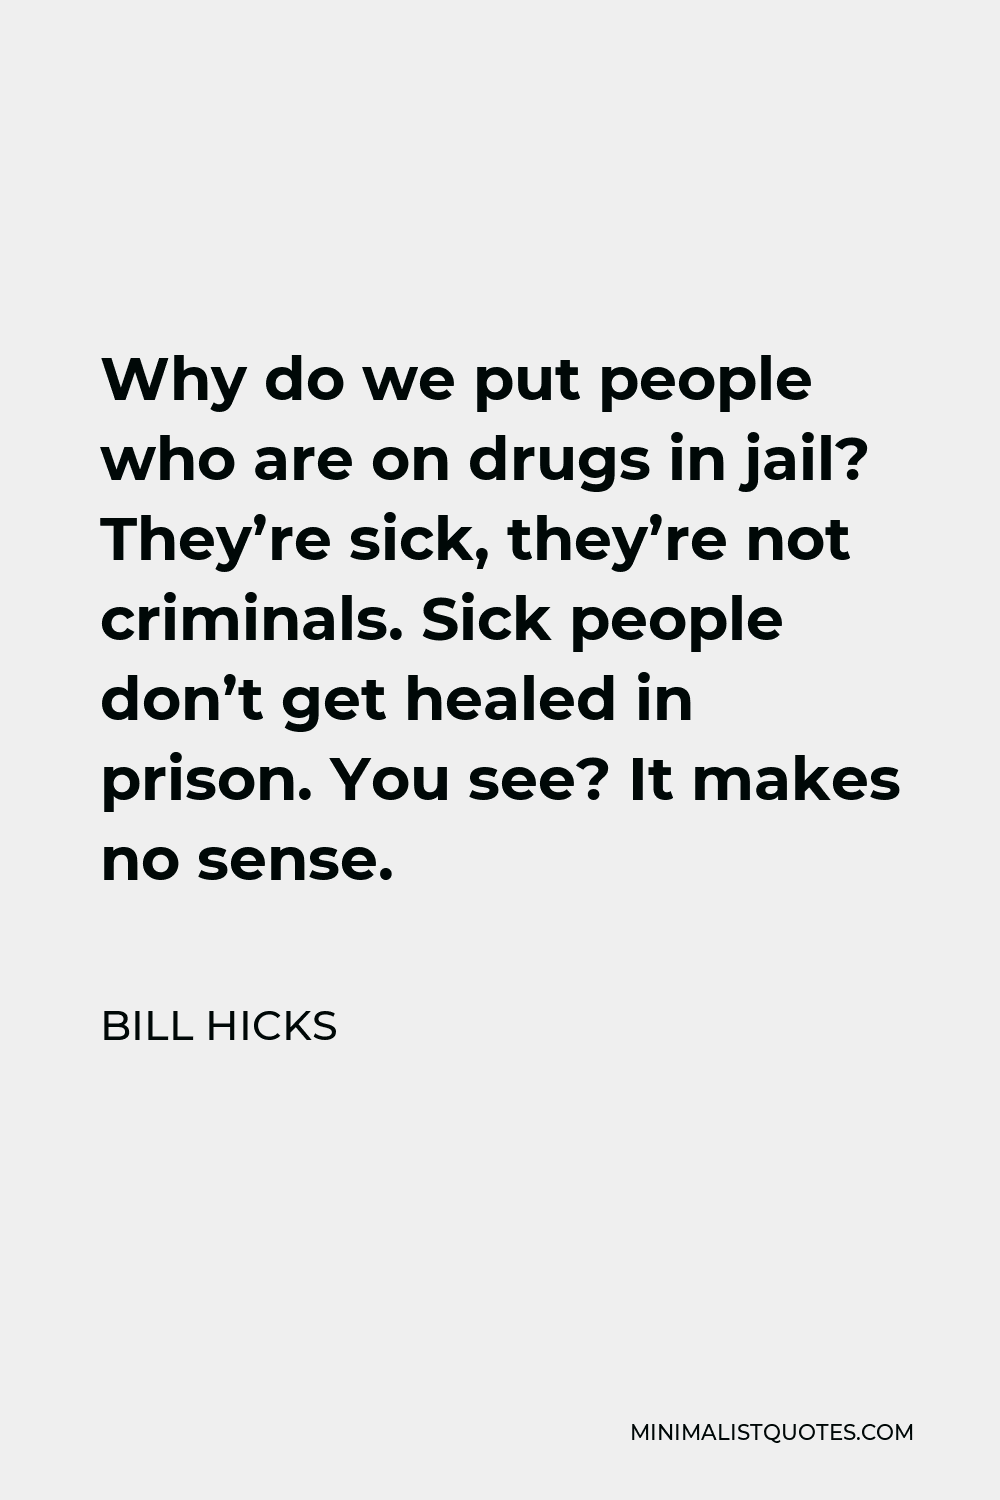 Bill Hicks Quote - Why do we put people who are on drugs in jail? They’re sick, they’re not criminals. Sick people don’t get healed in prison. You see? It makes no sense.